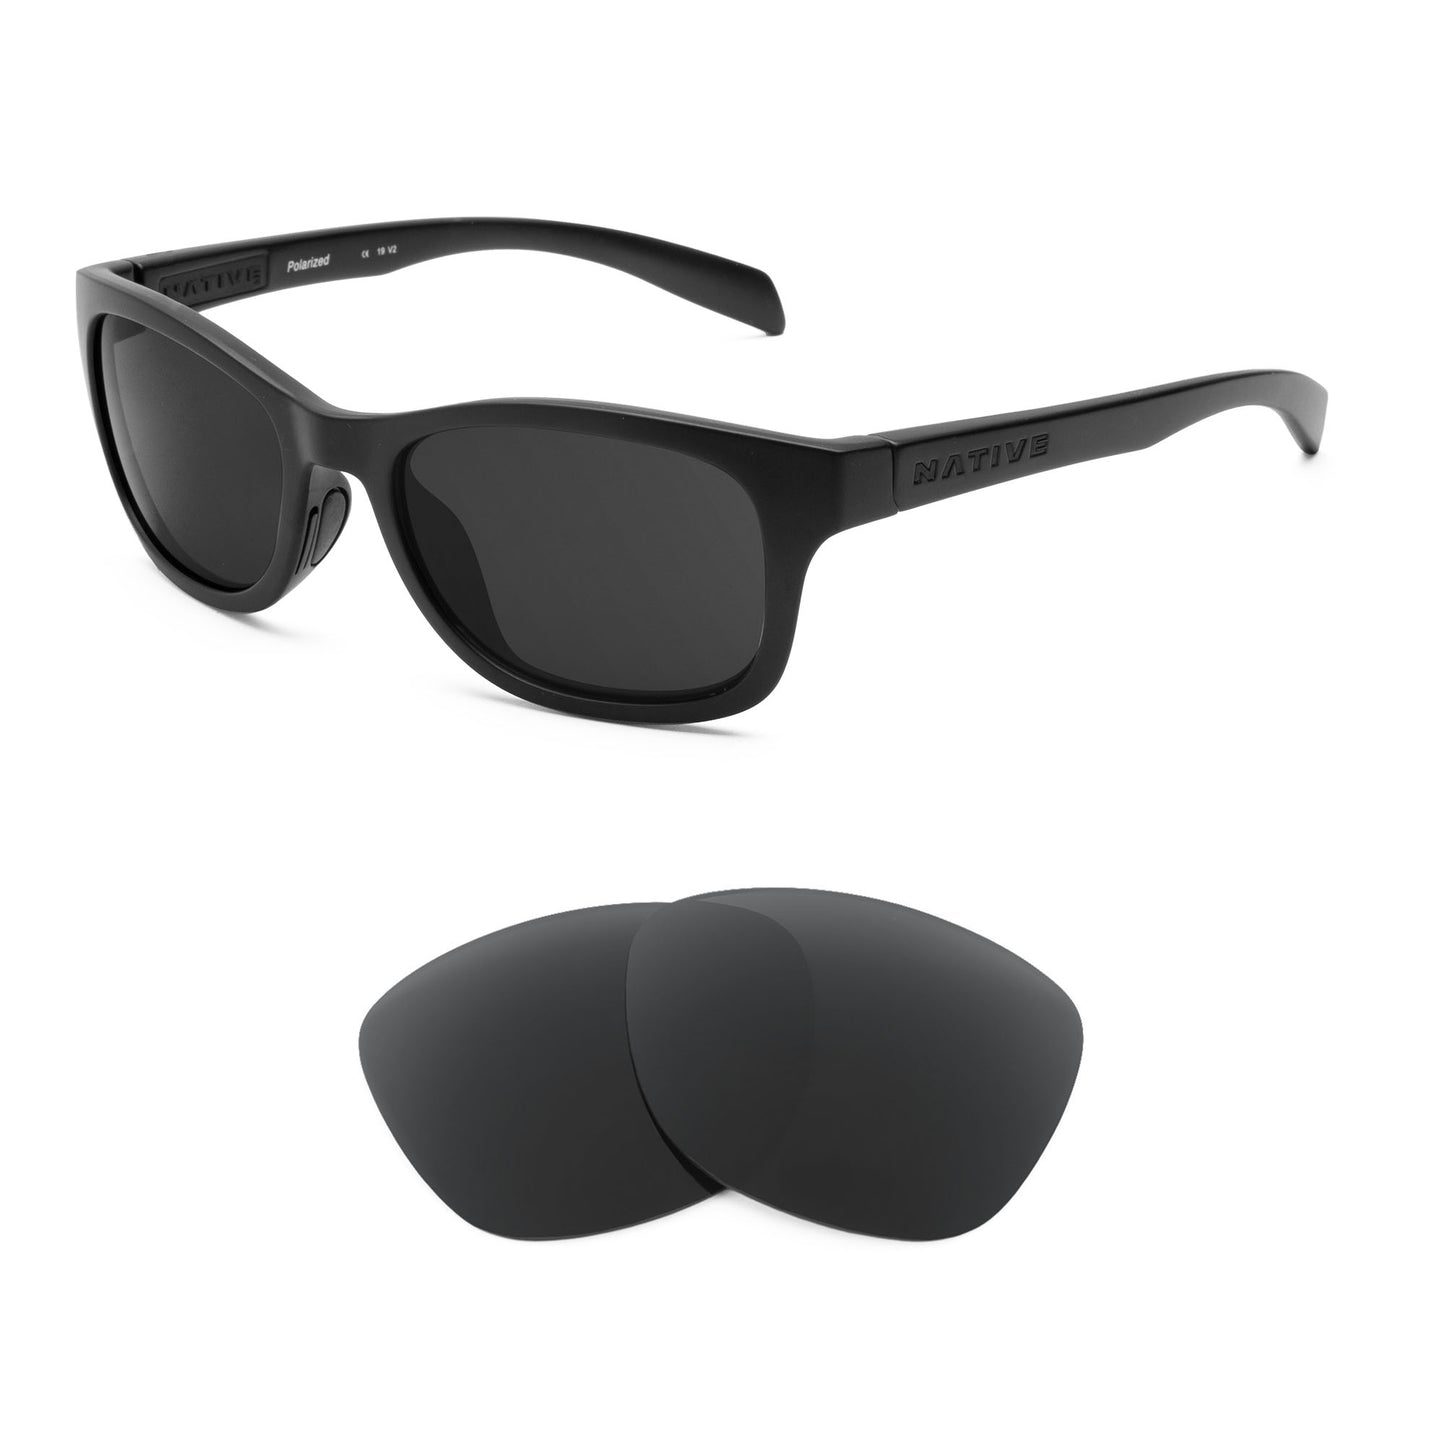 Native Highline sunglasses with replacement lenses